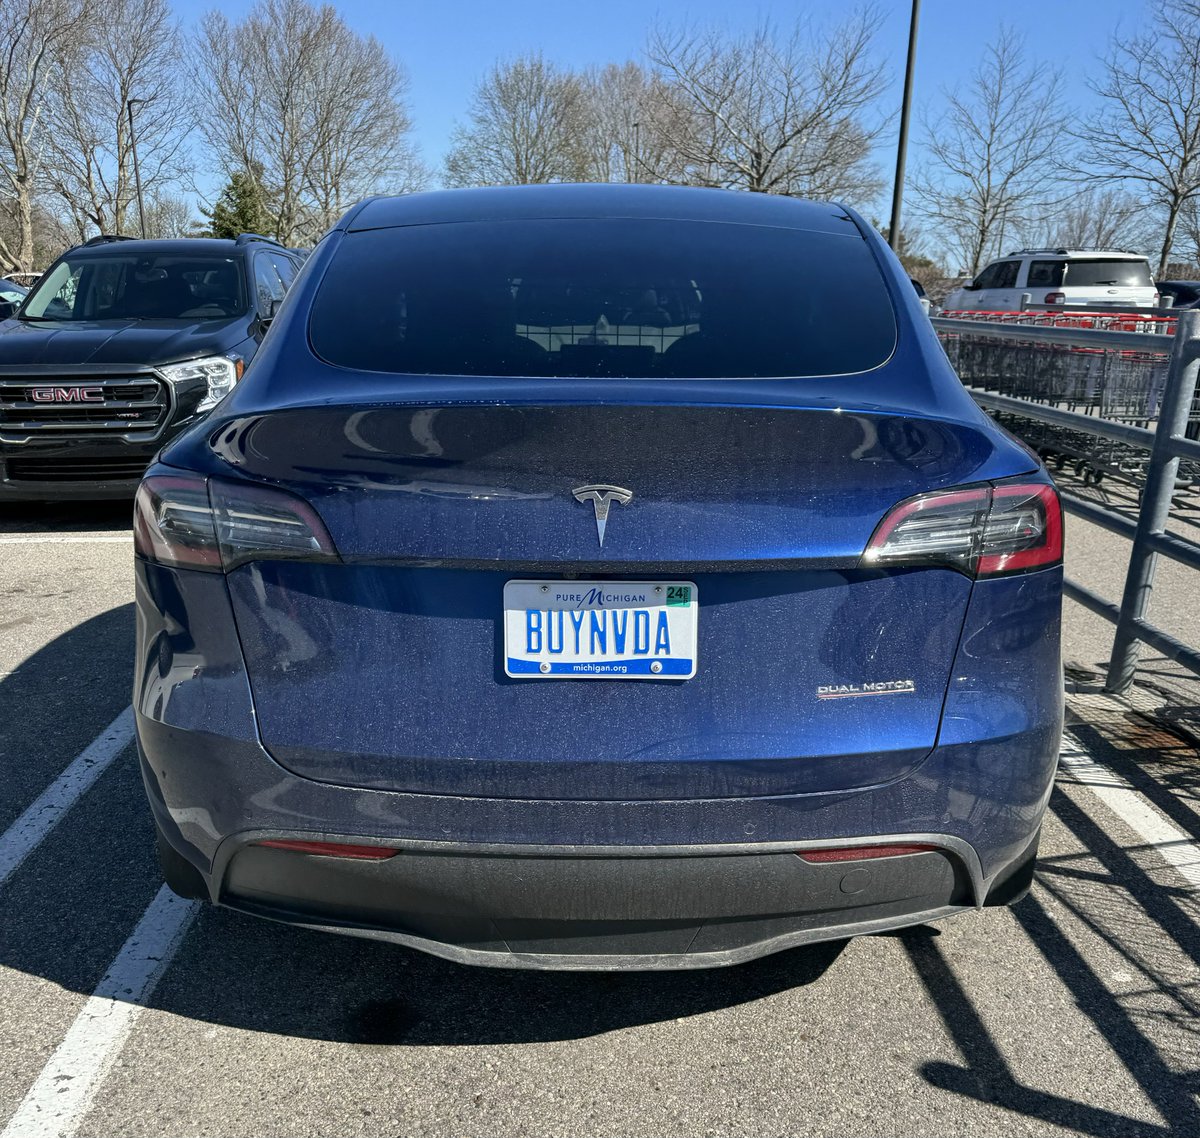 Is this Tesla at Costco the Most #AnnArbor thing? Discuss.